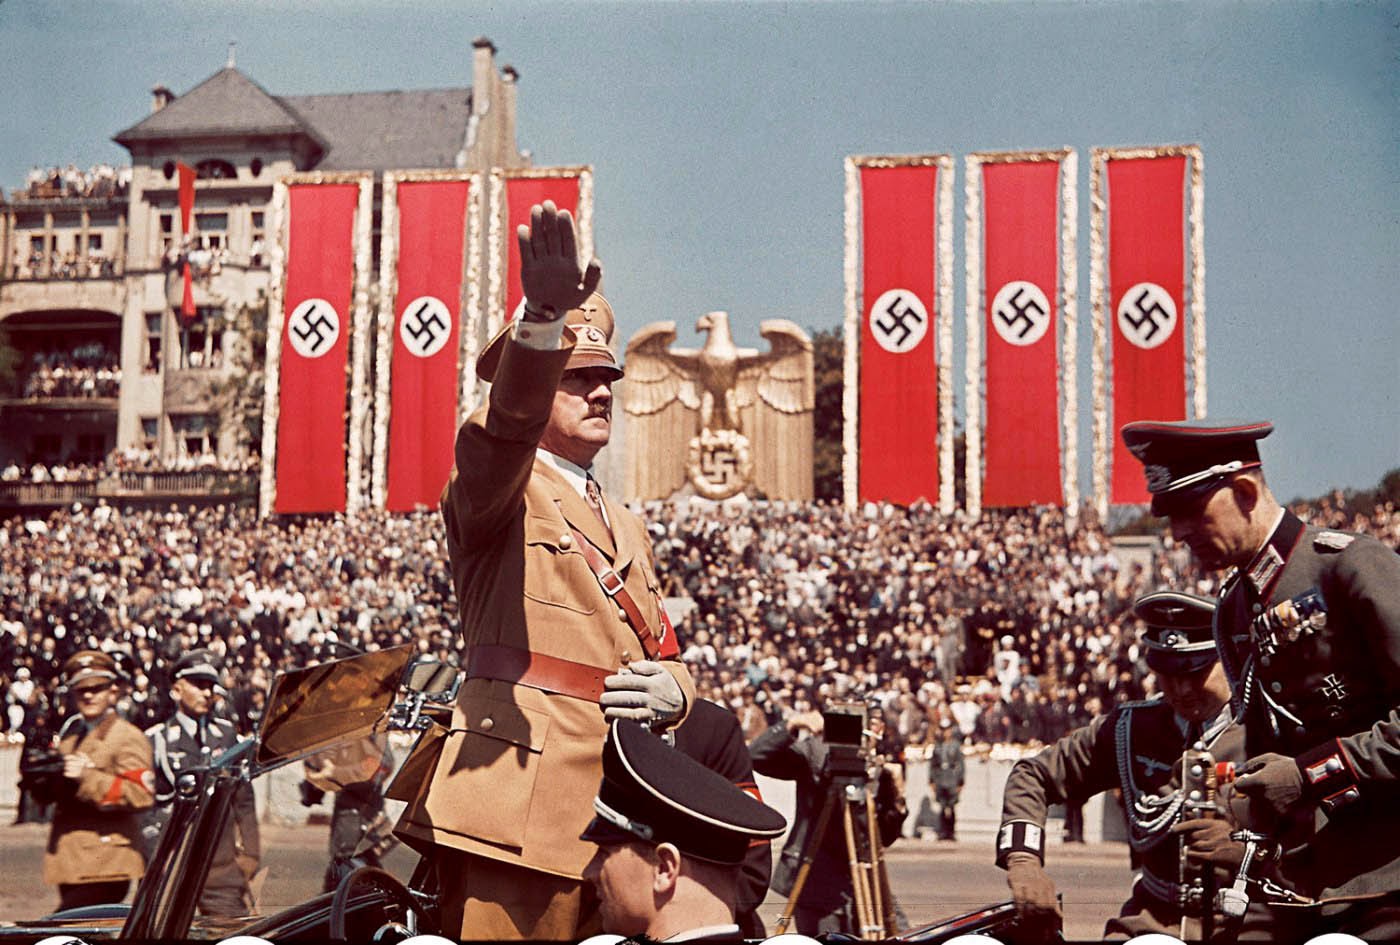 Adolf Hitler salutes troops of the Condor Legion who fought alongside Spanish Nationalists in the Spanish Civil War, during a rally upon their return to Germany, 1939.